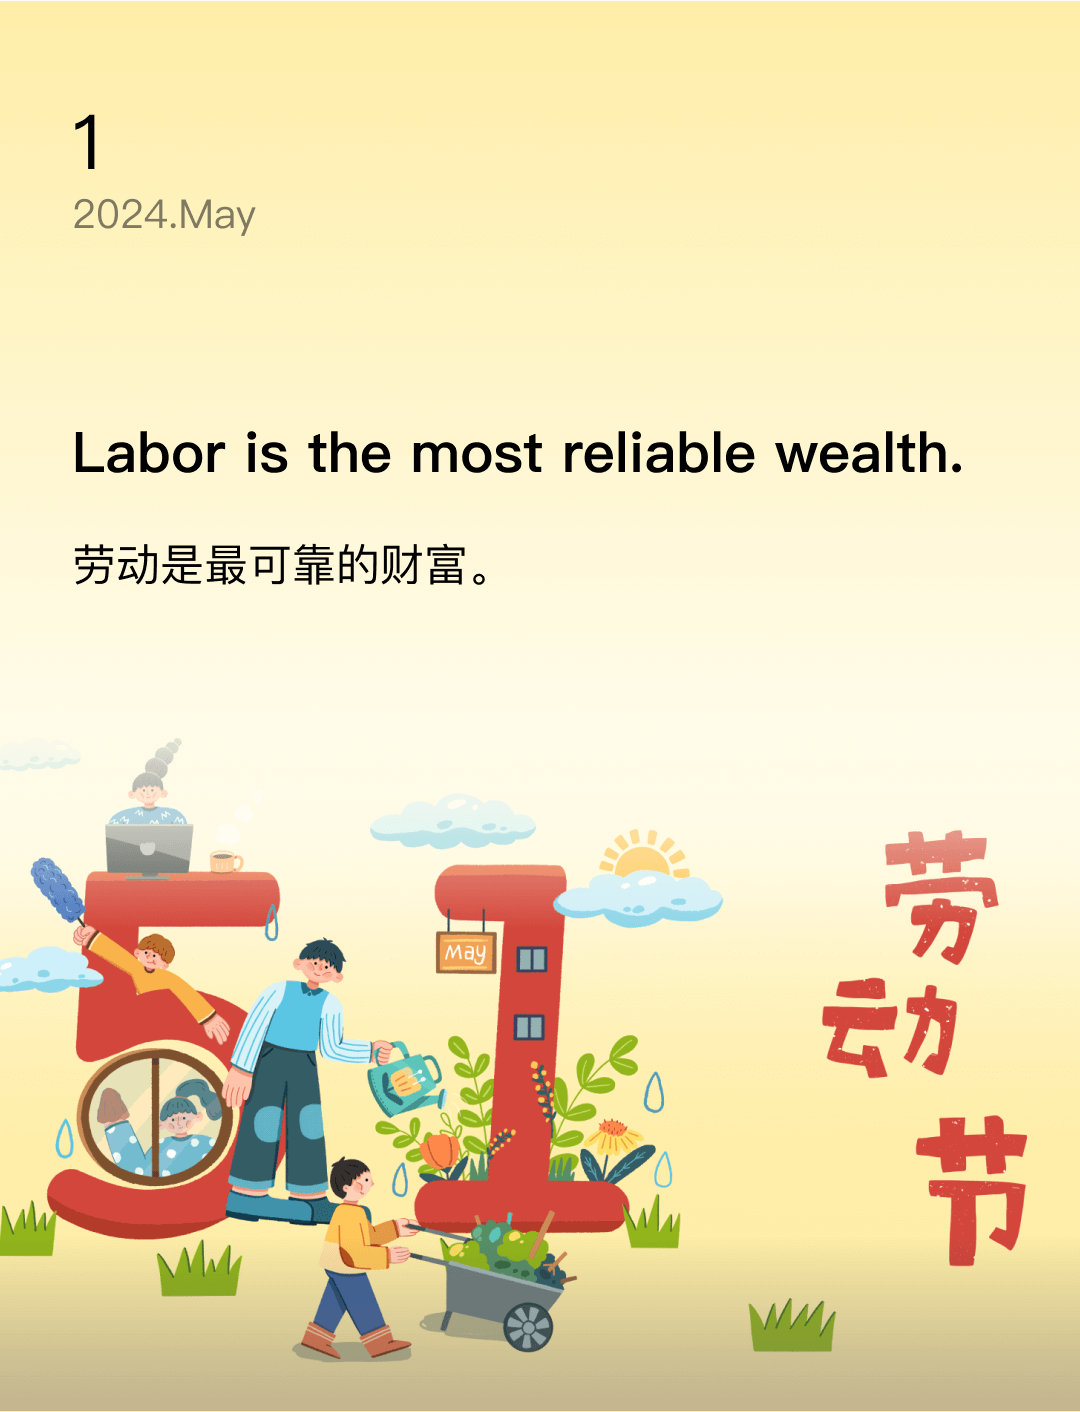 Labor is the most reliable wealth.